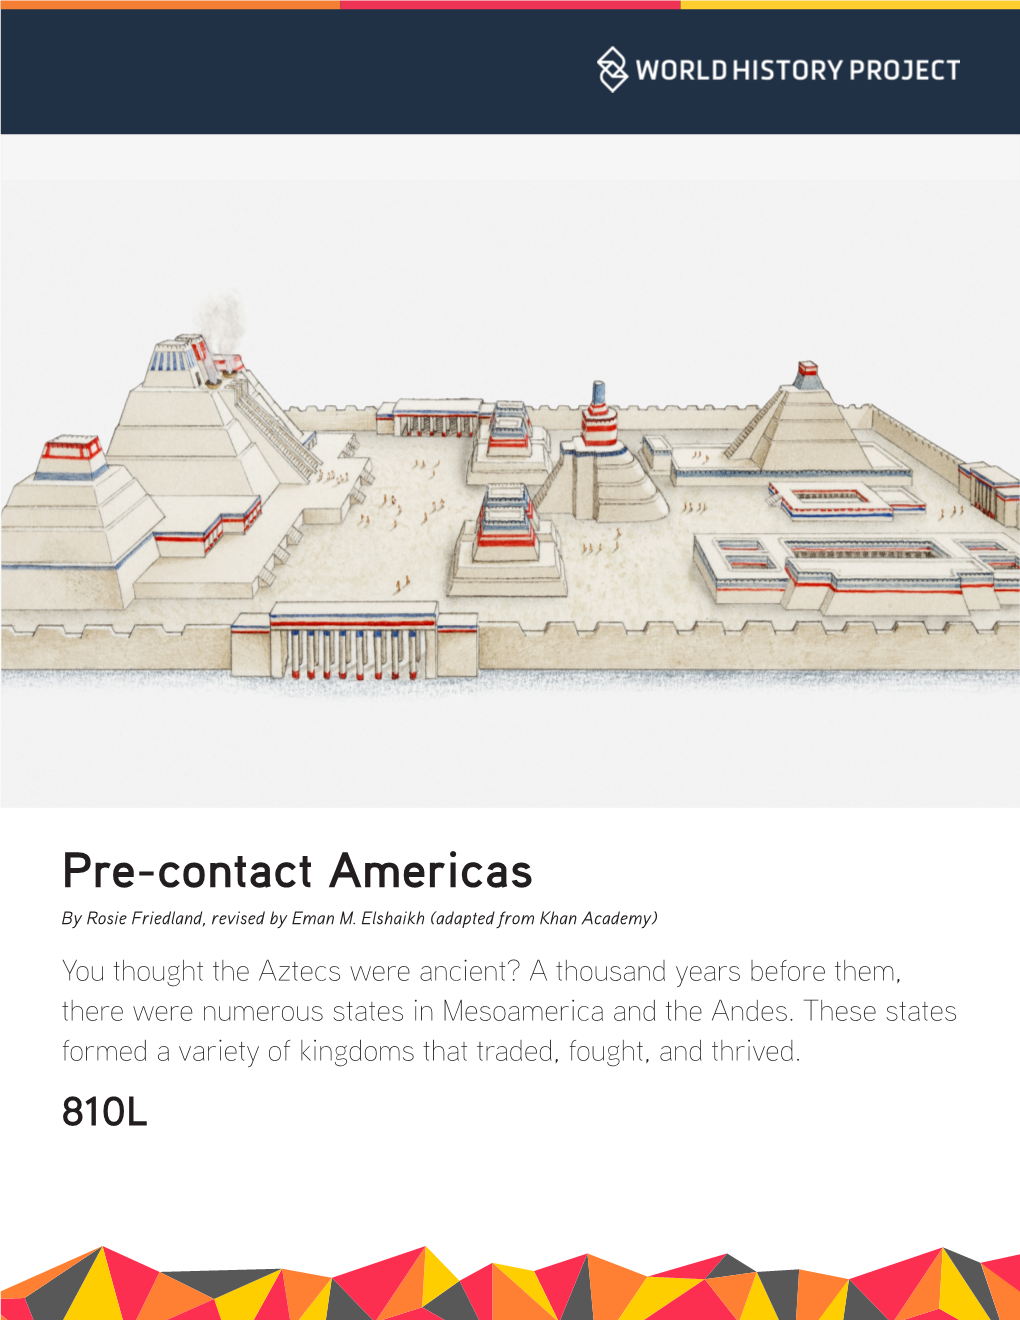 Pre-Contact Americas by Rosie Friedland, Revised by Eman M